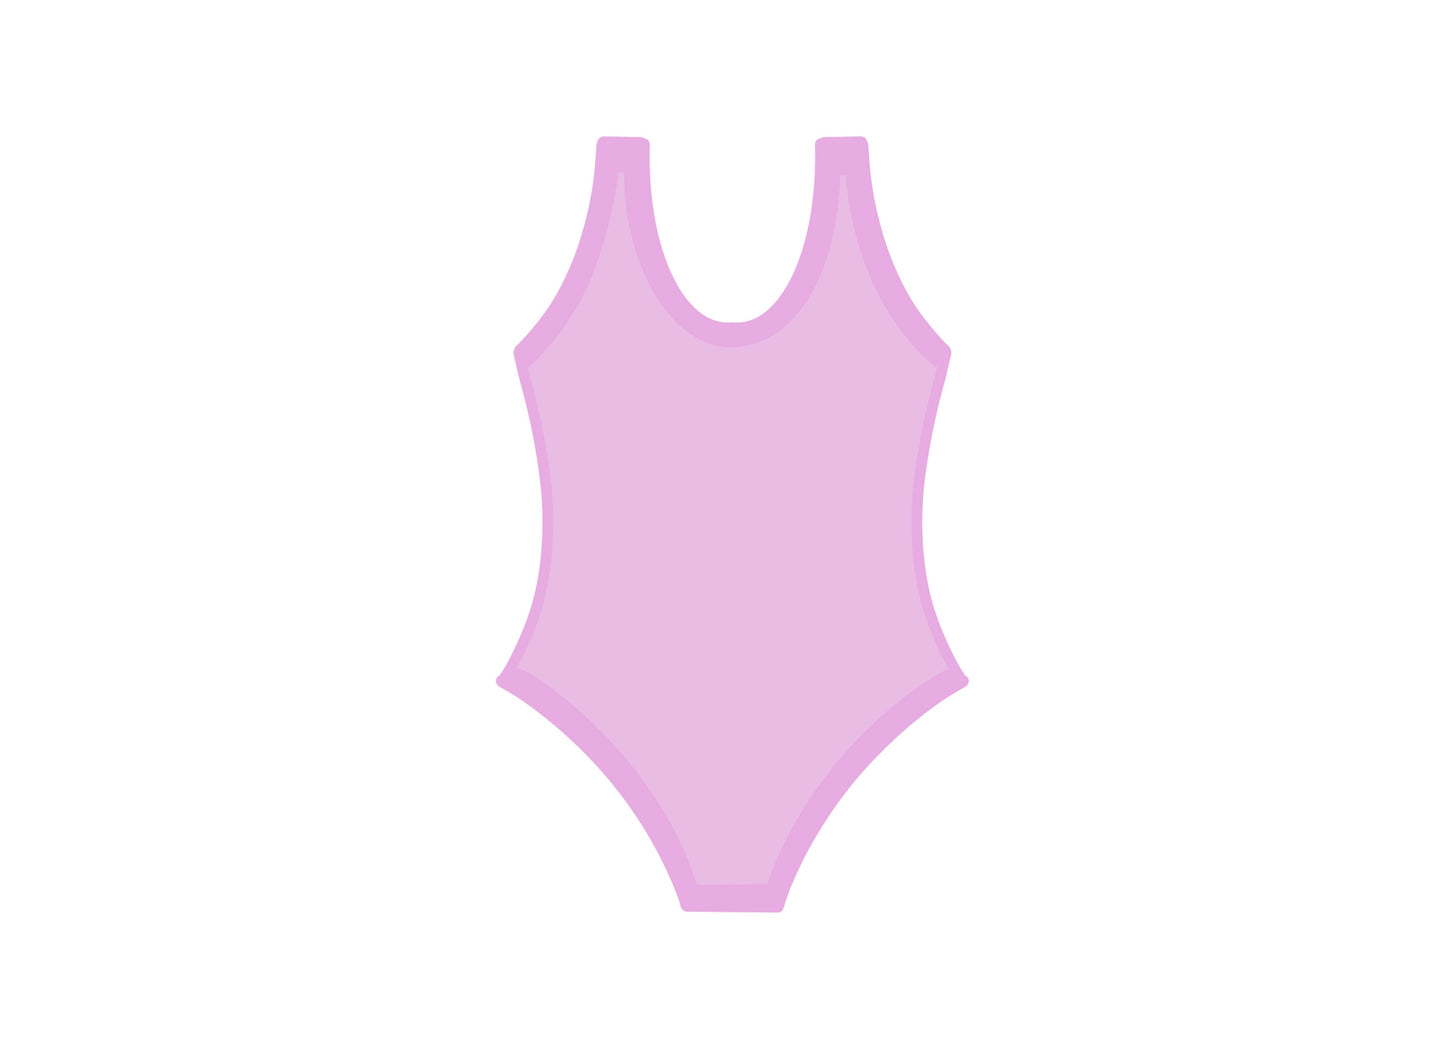 Swimsuit 3 Cookie Cutter